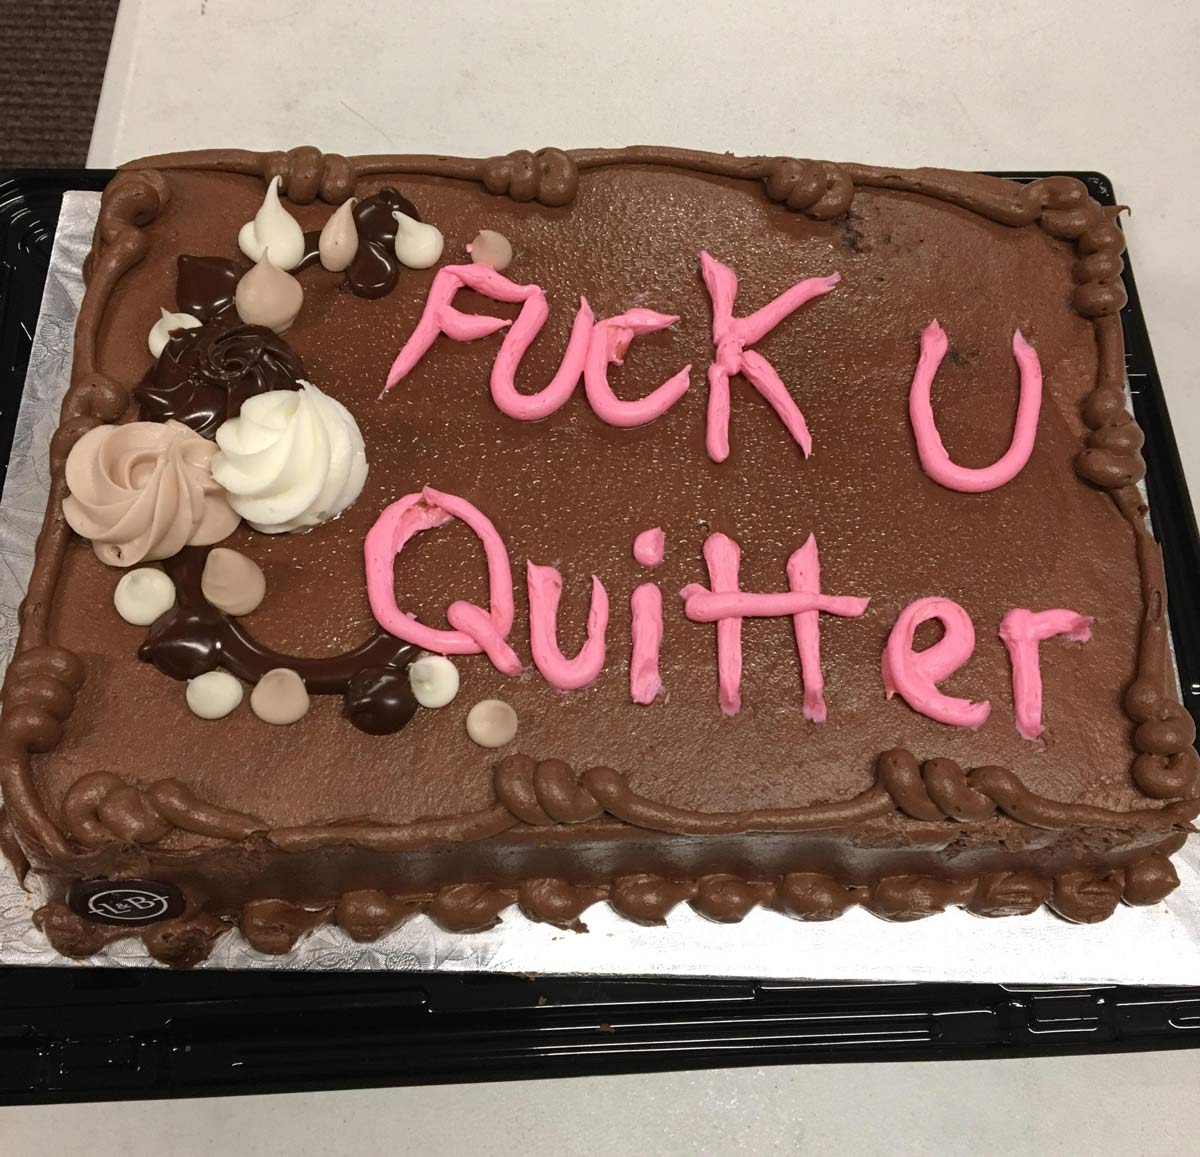 My former coworkers were so supportive towards me changing jobs, they got me a cake!